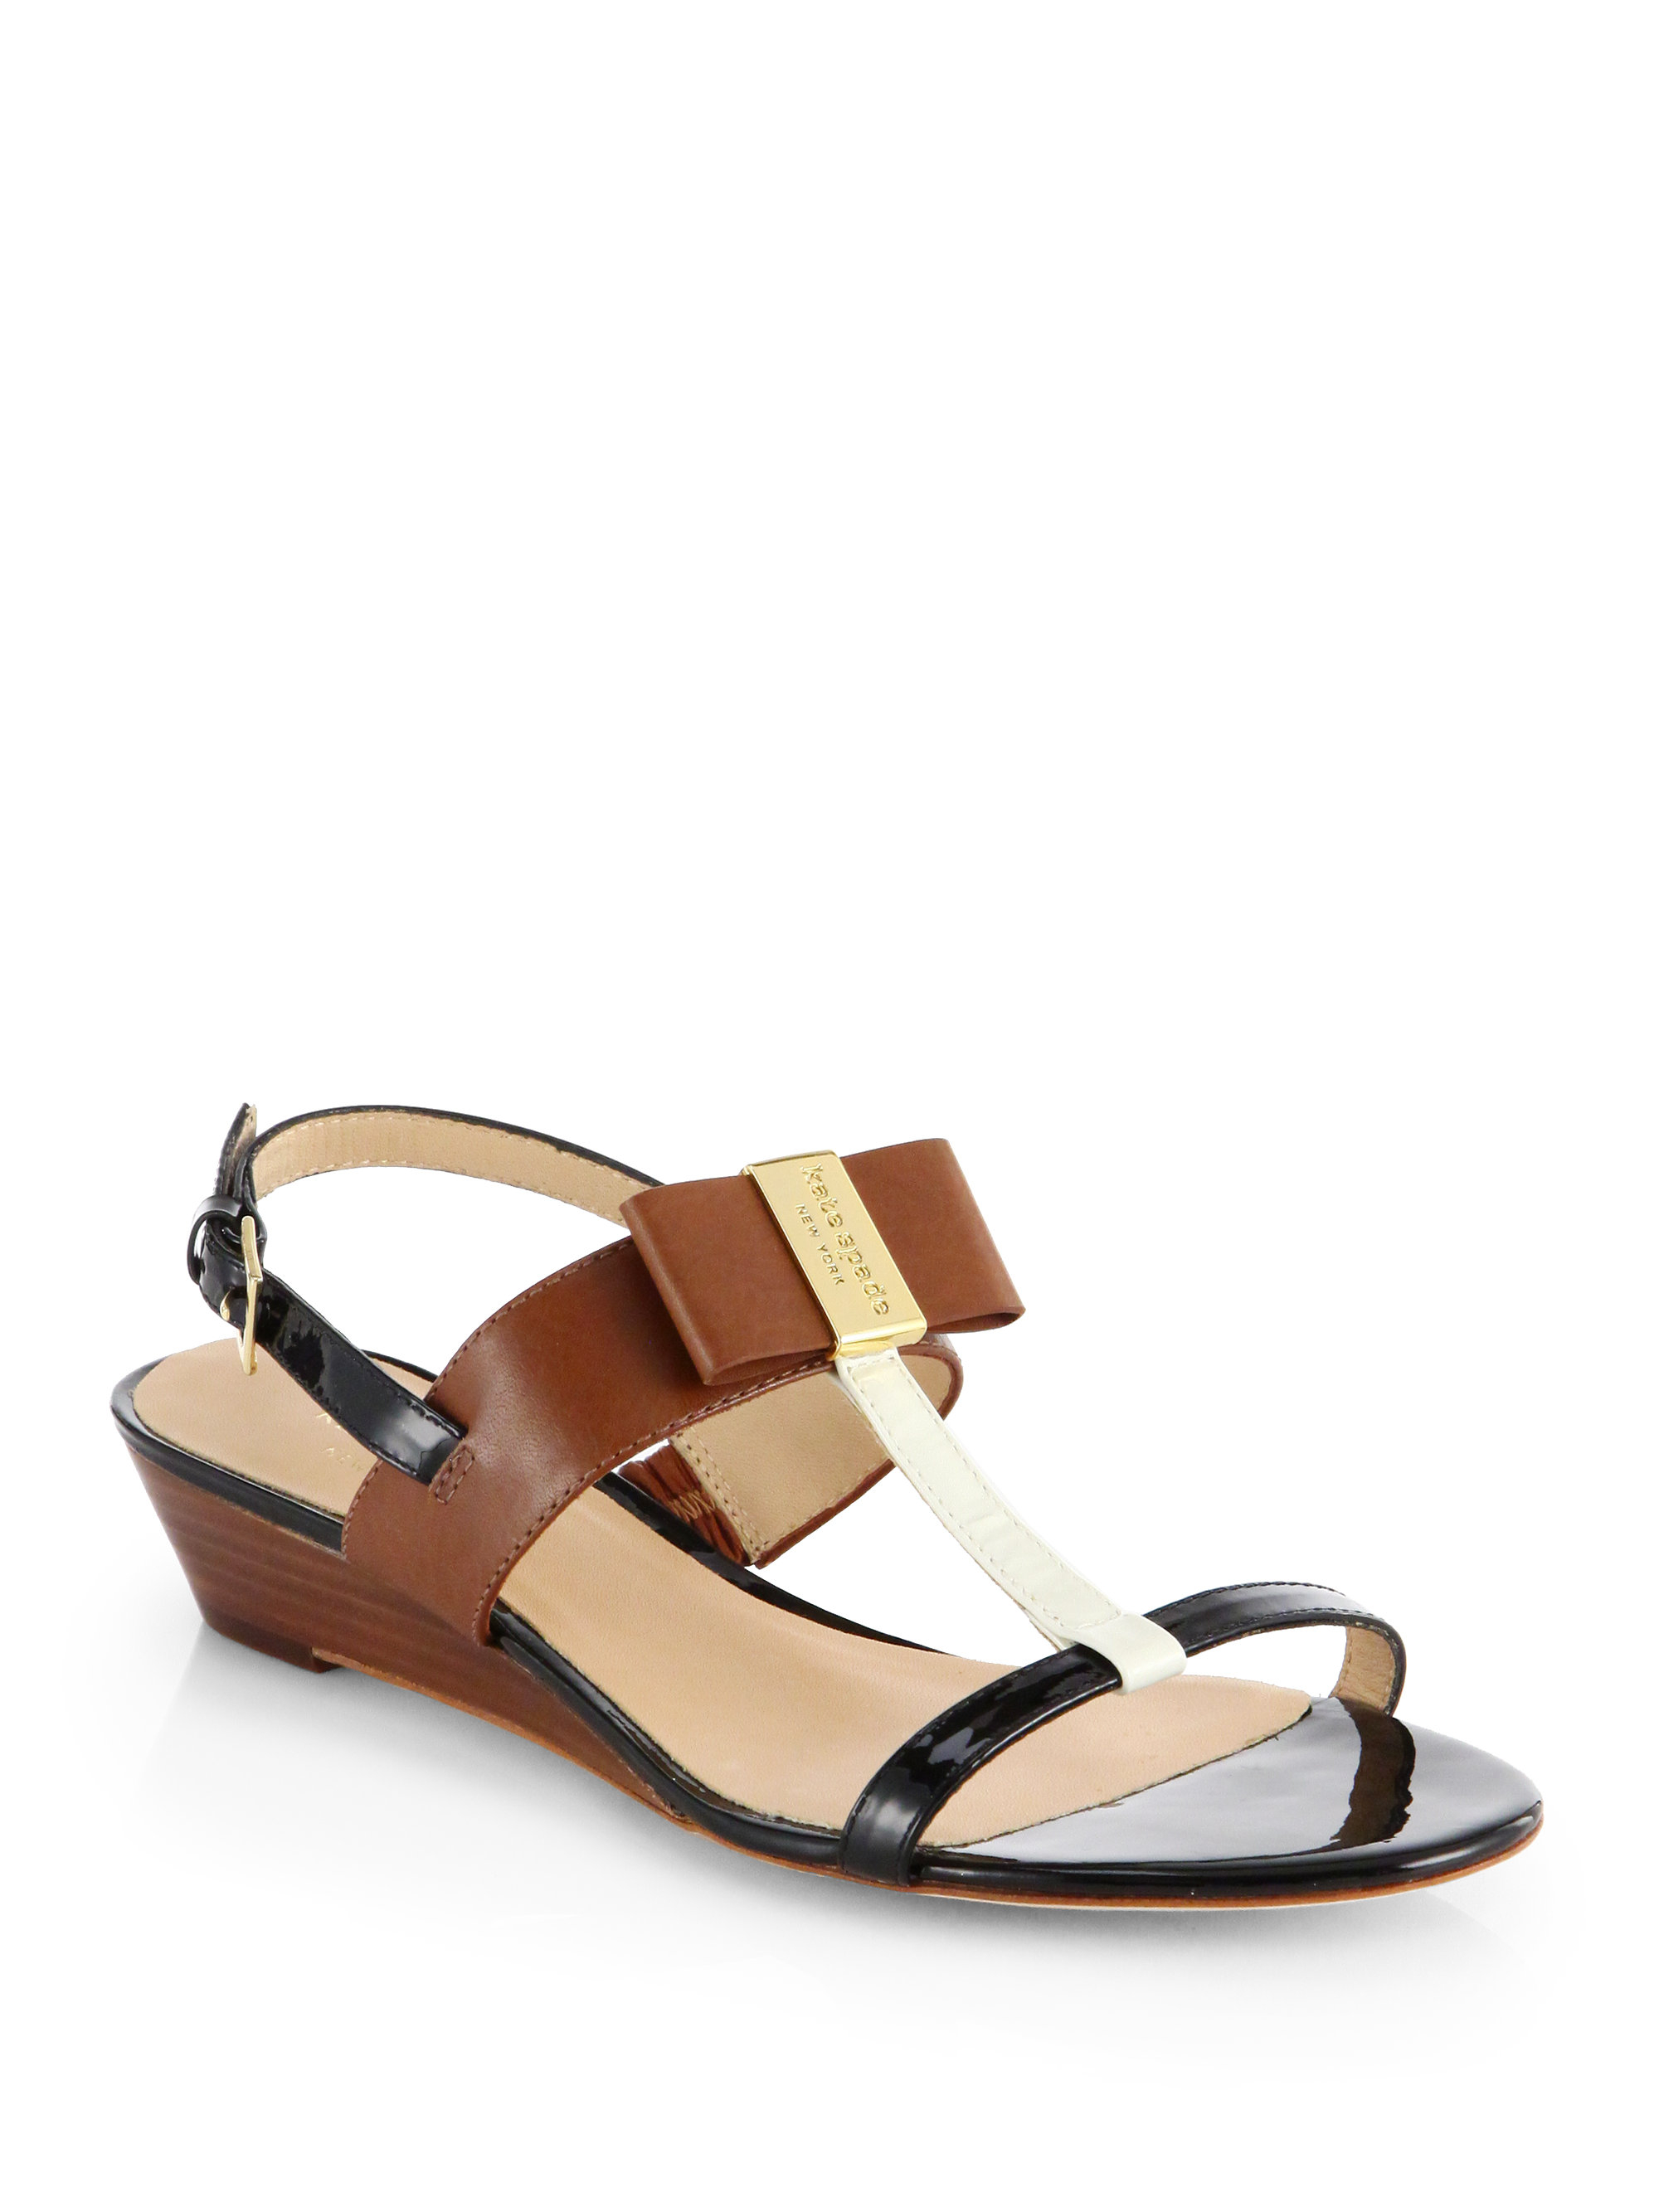 Kate Spade Vinny Leather T Strap Wedge Sandals in Black (CREAM) | Lyst